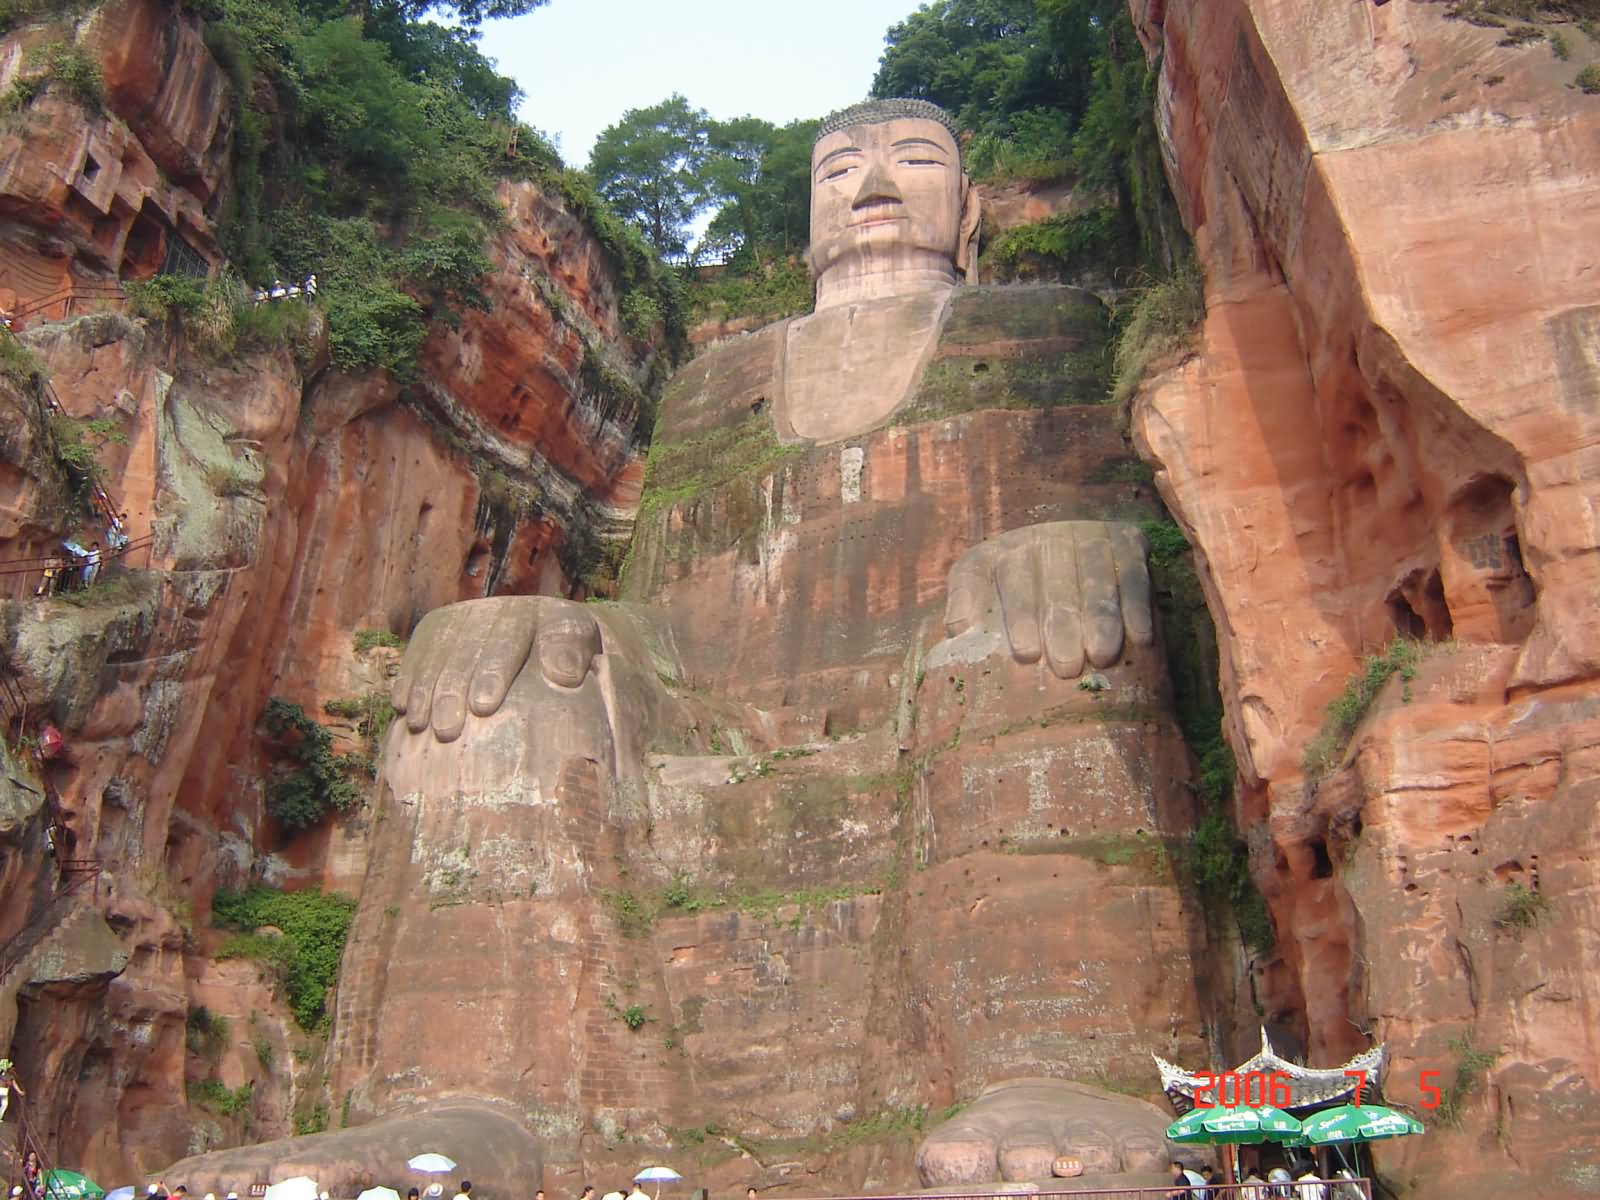 Beautiful Picture Of The Giant Buddha Statue In Leshan, China